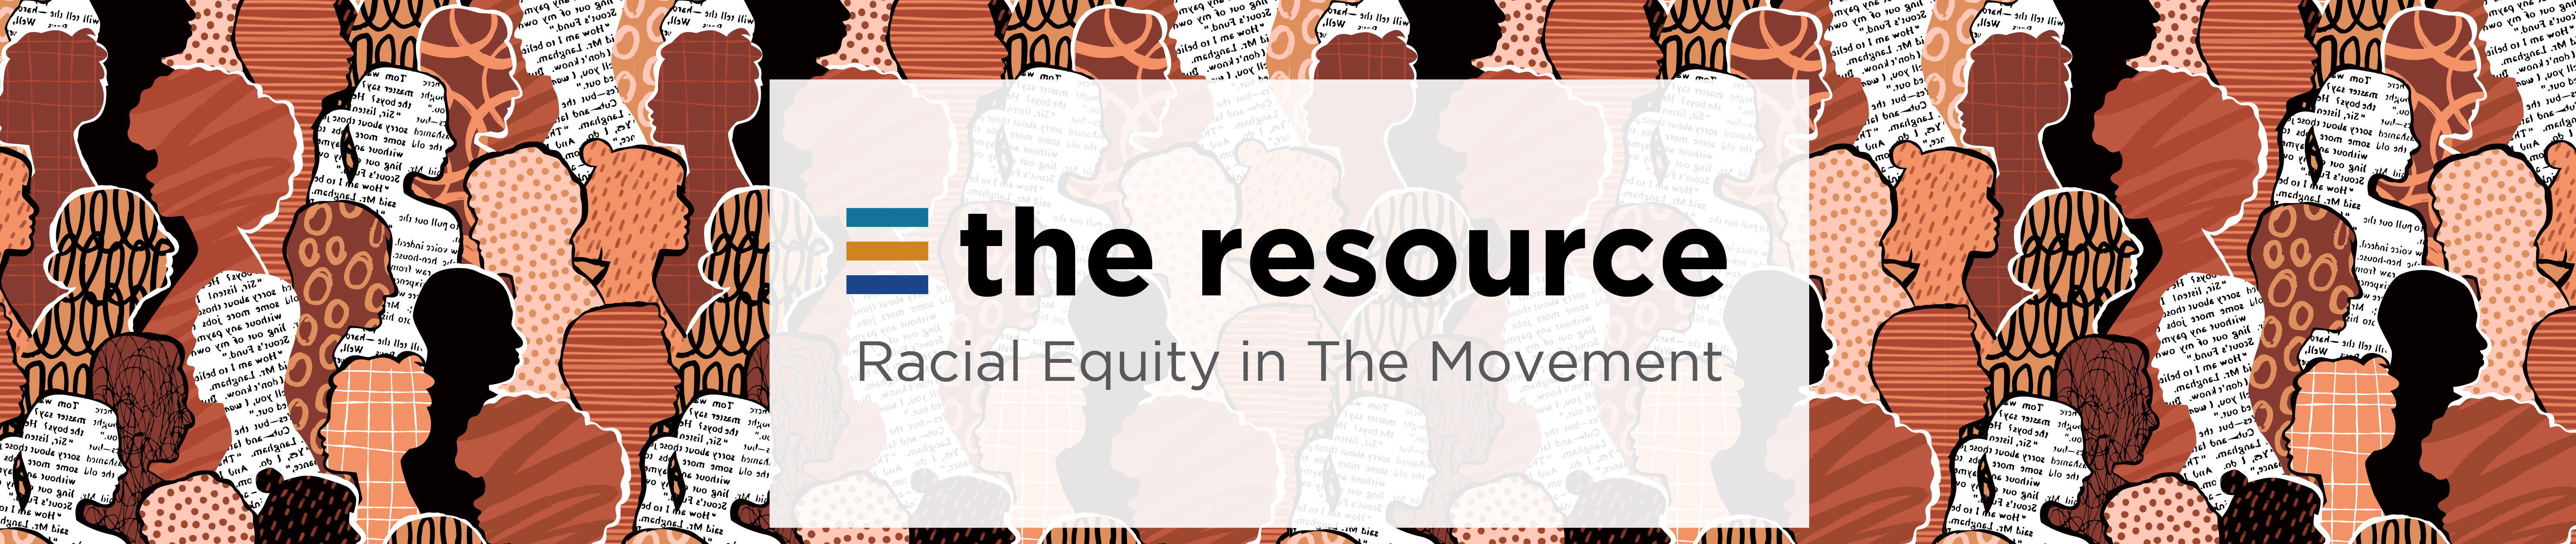 The Resource: Racial Equity in the Movement